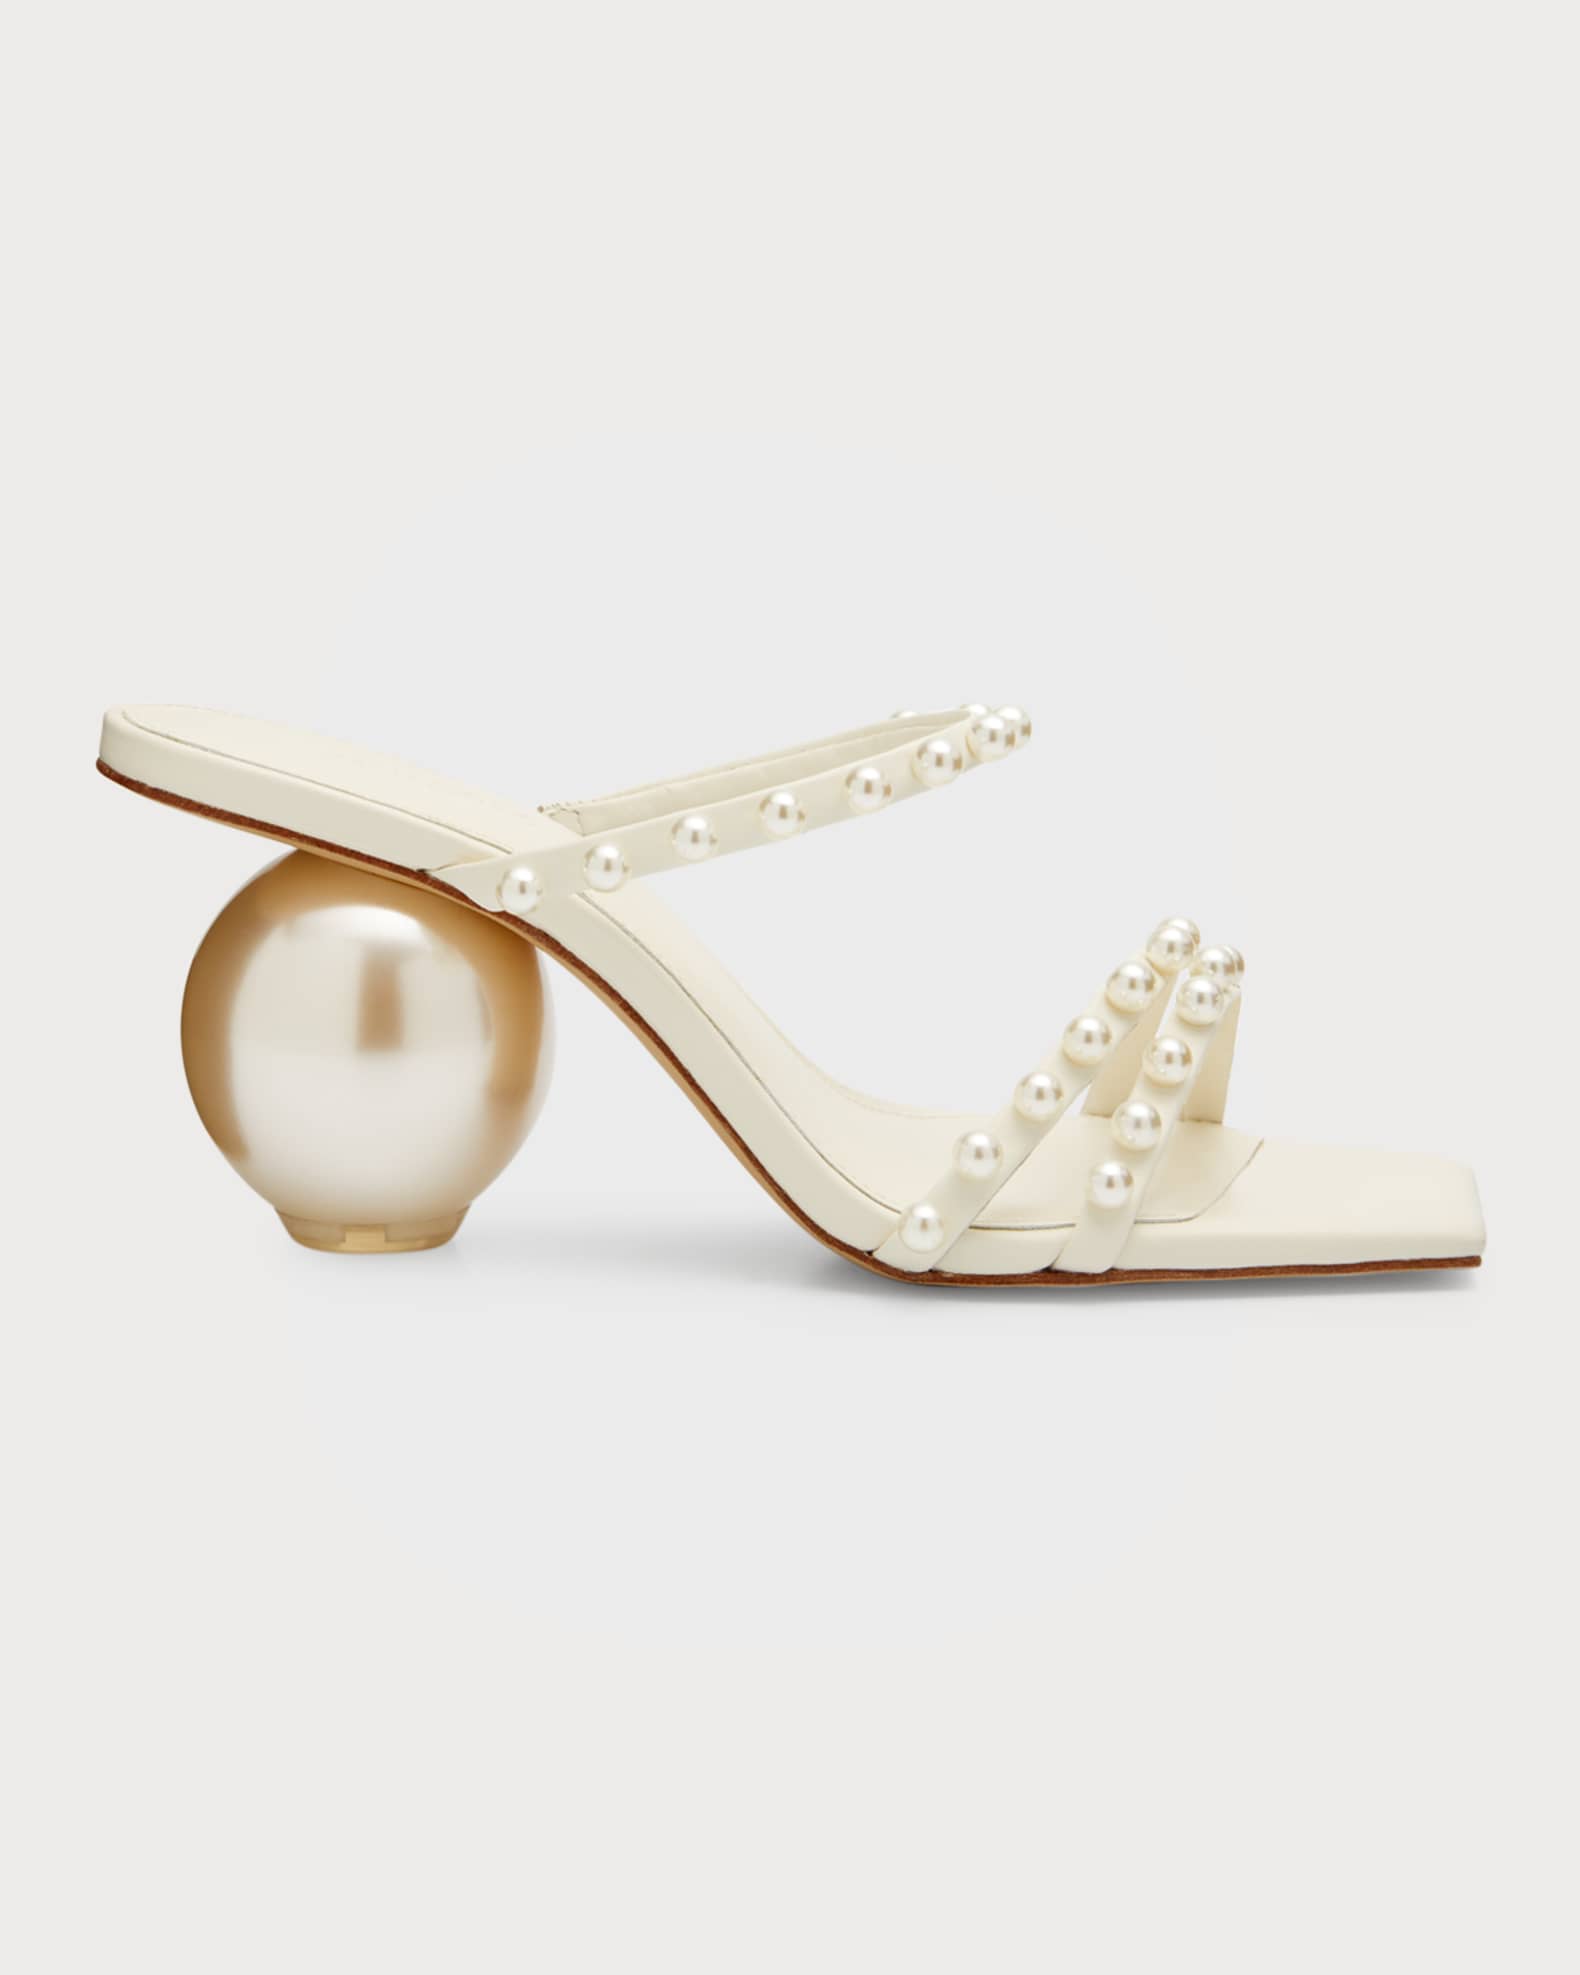 Chic white heels from Cult Gaia